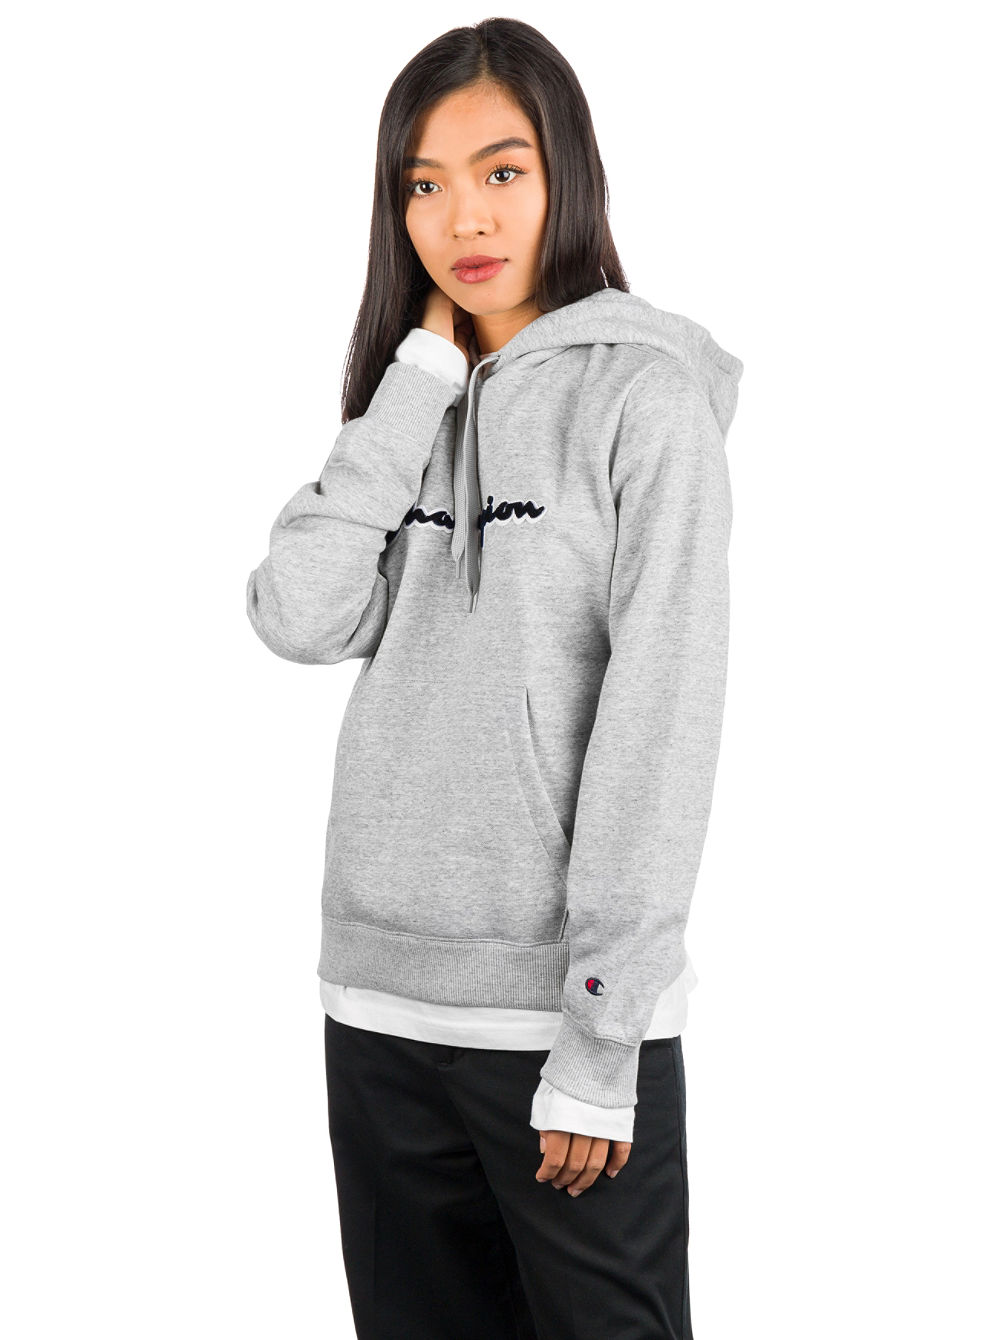 American Logo Sweater Pulover s kapuco